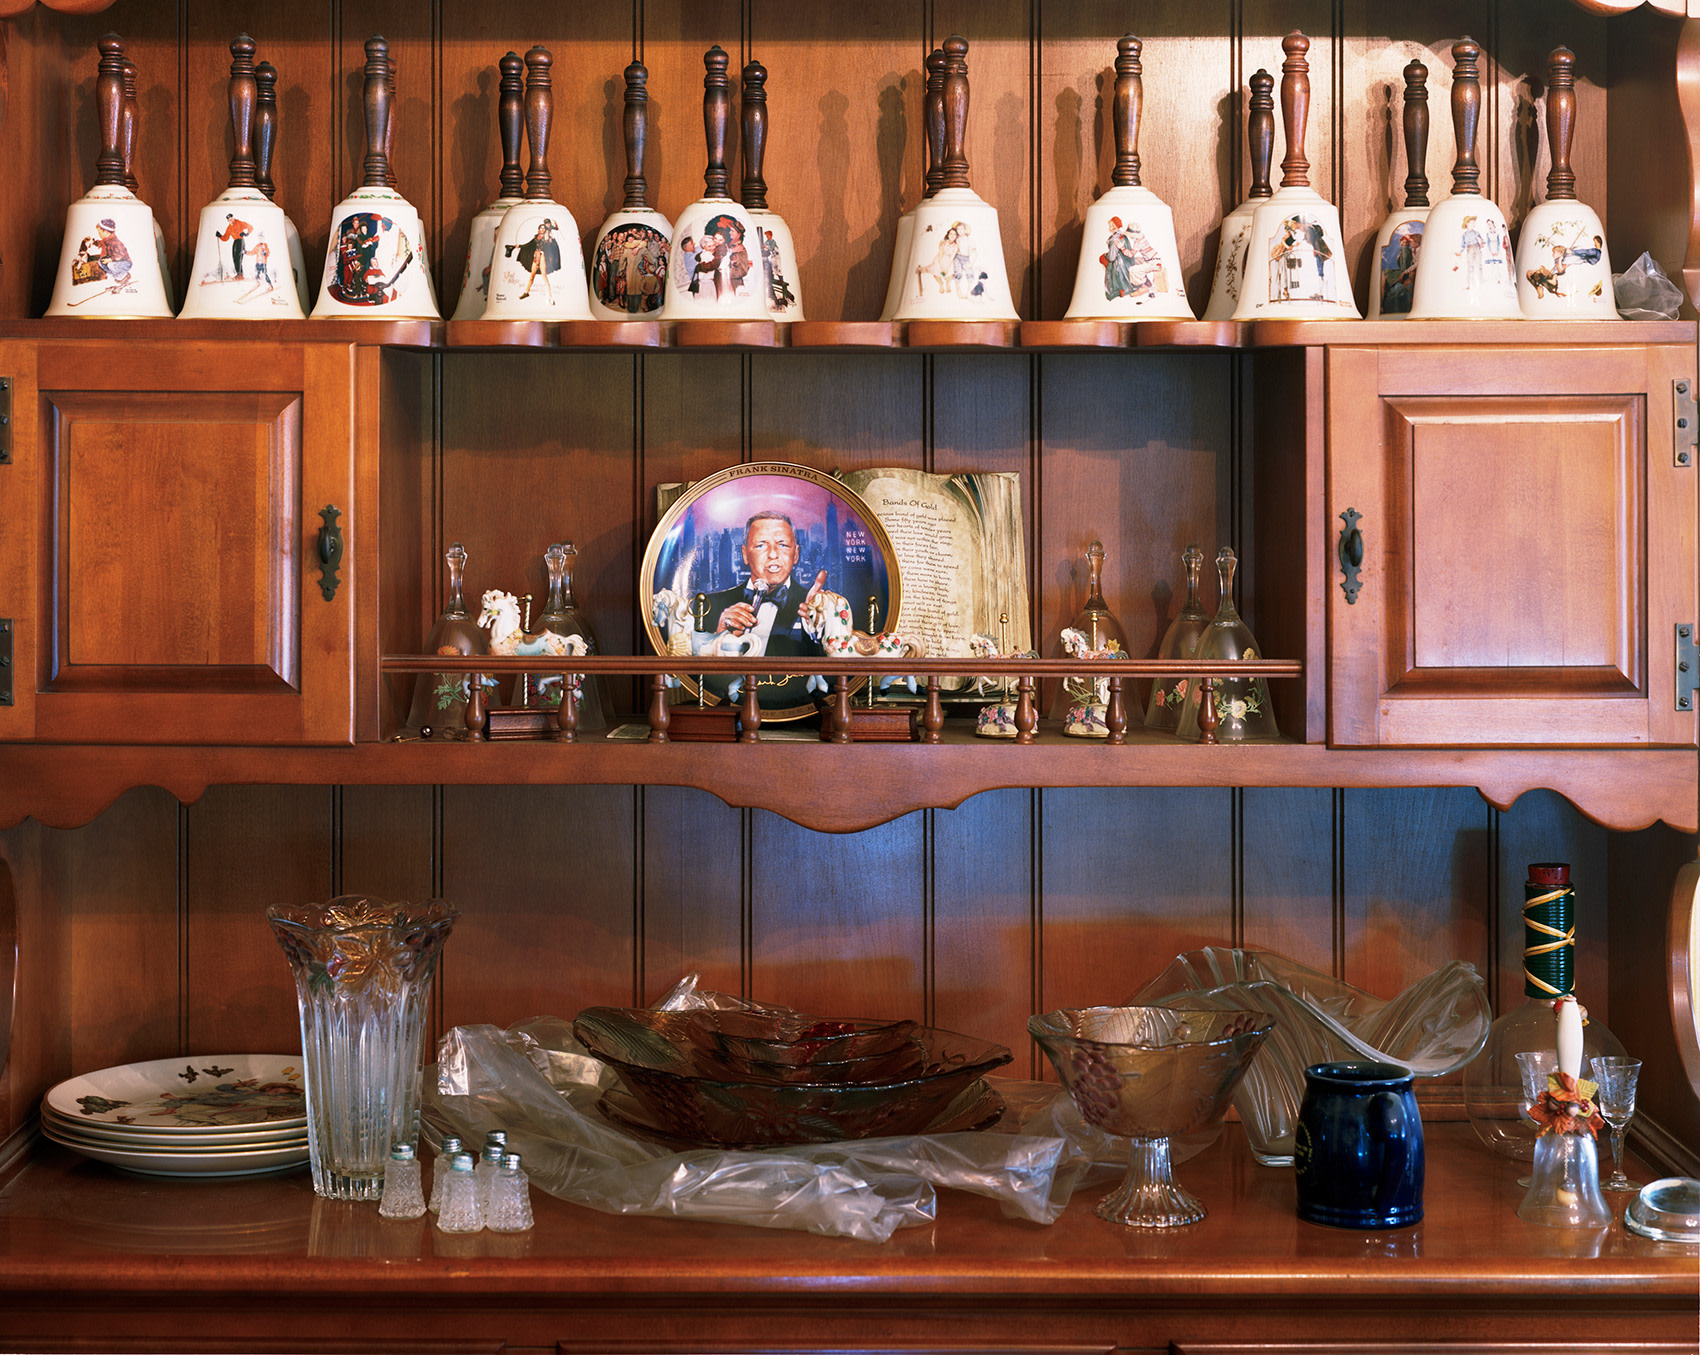 Photograph of old fashion china cabinet with row of bells, by Jade Doskow